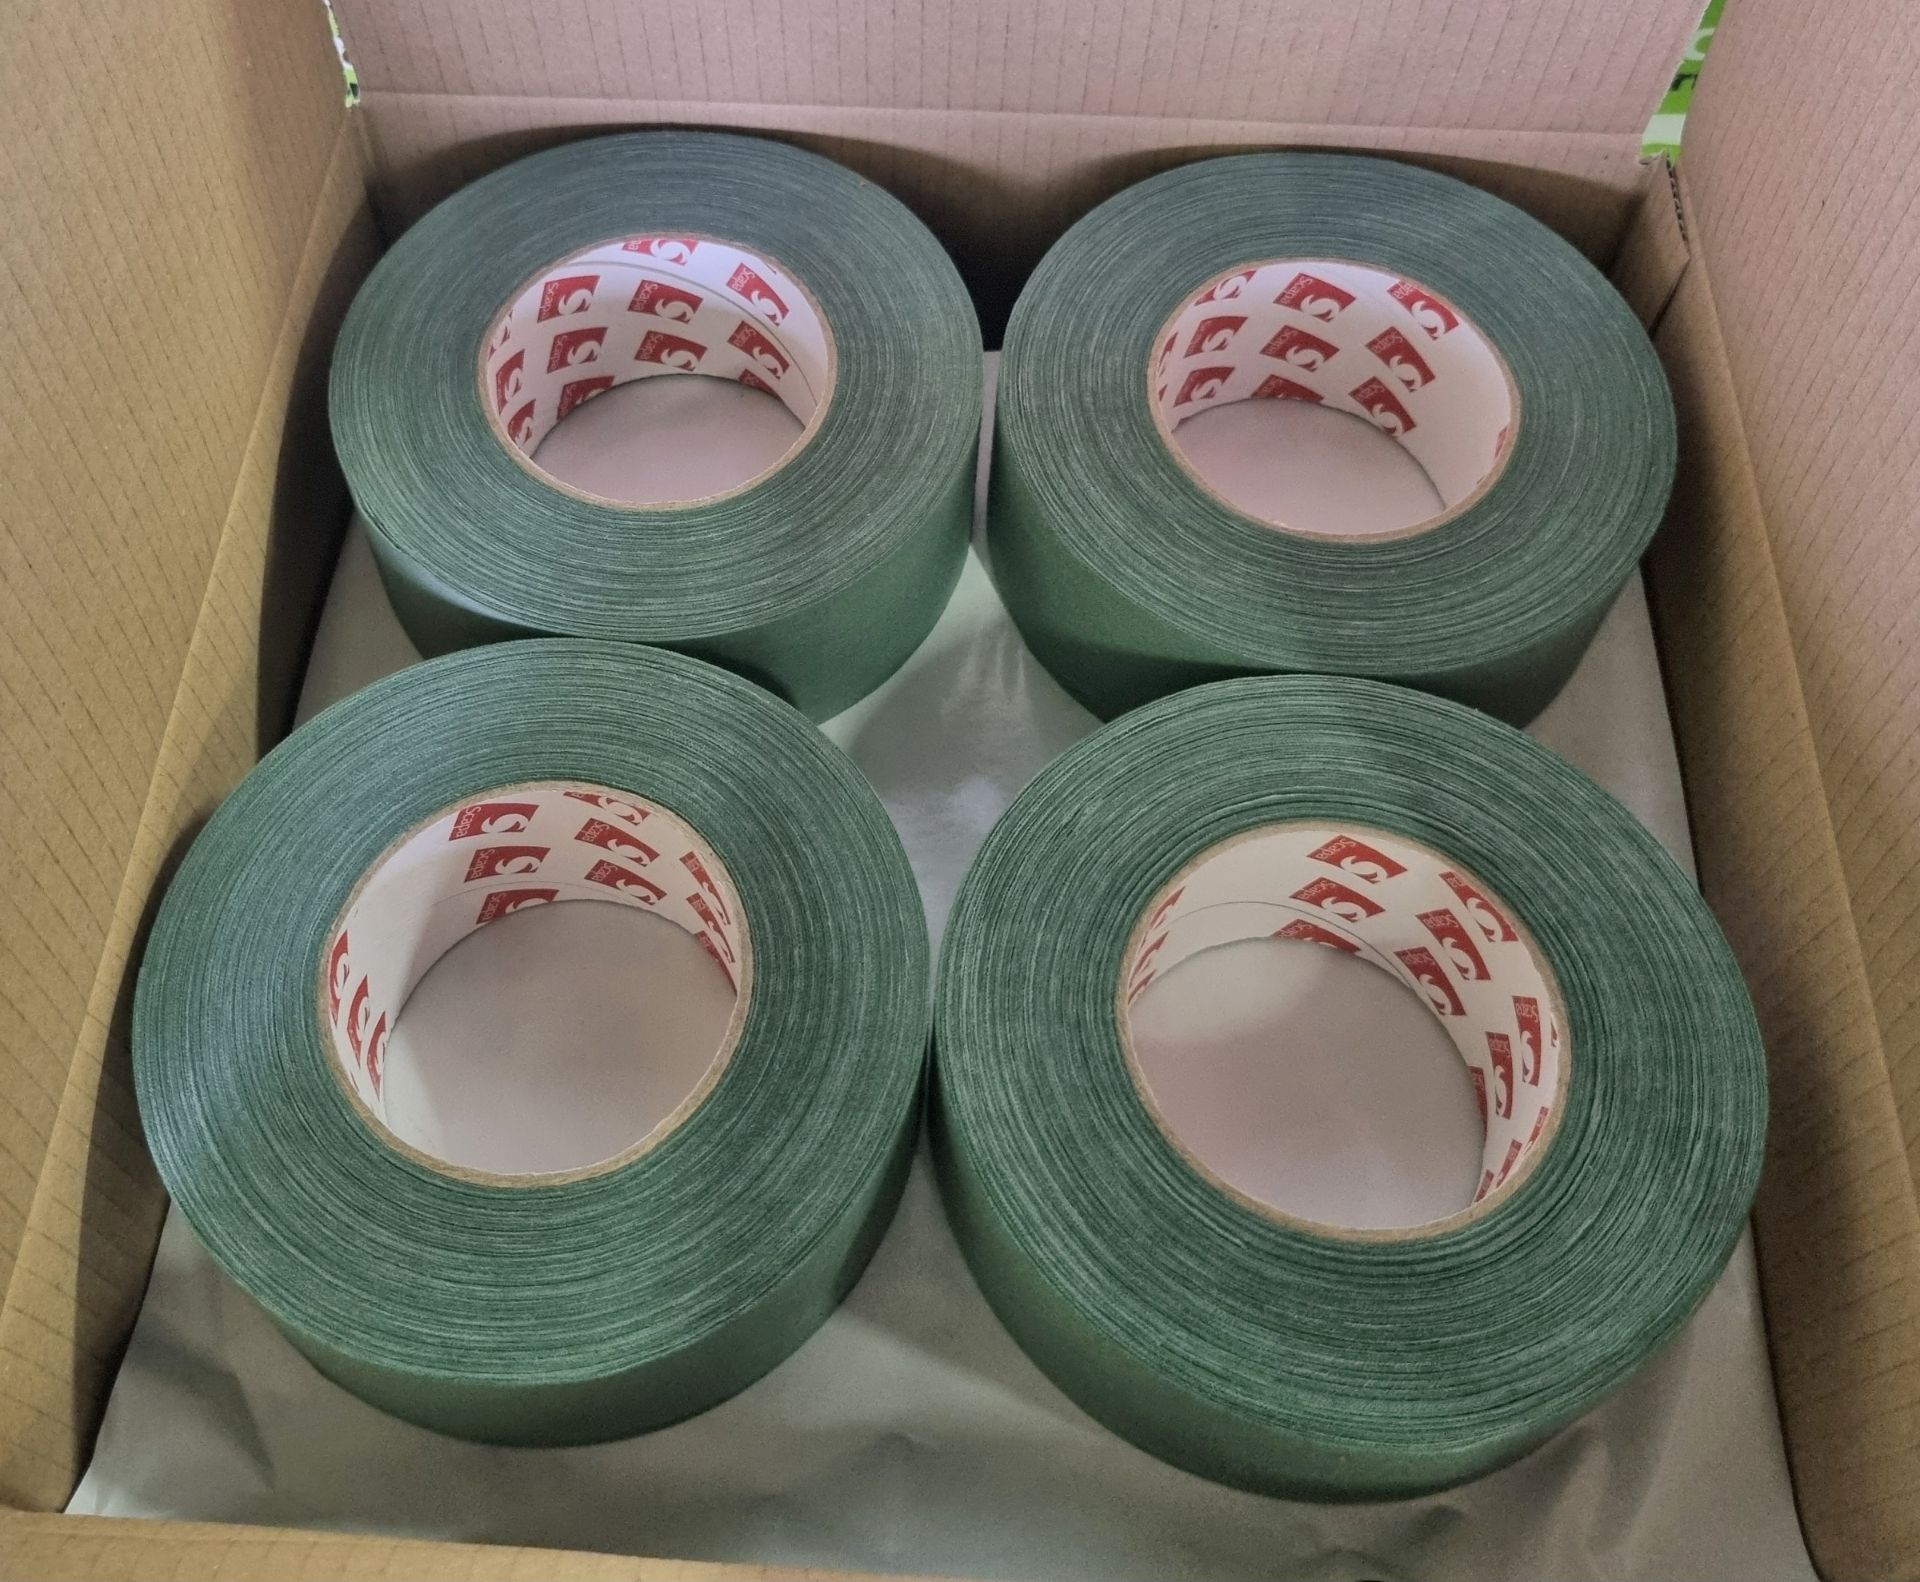 2x boxes of Scapa 3302 uncoated cotton cloth adhesive tape - olive green - 50mm x 50m - Bild 4 aus 4